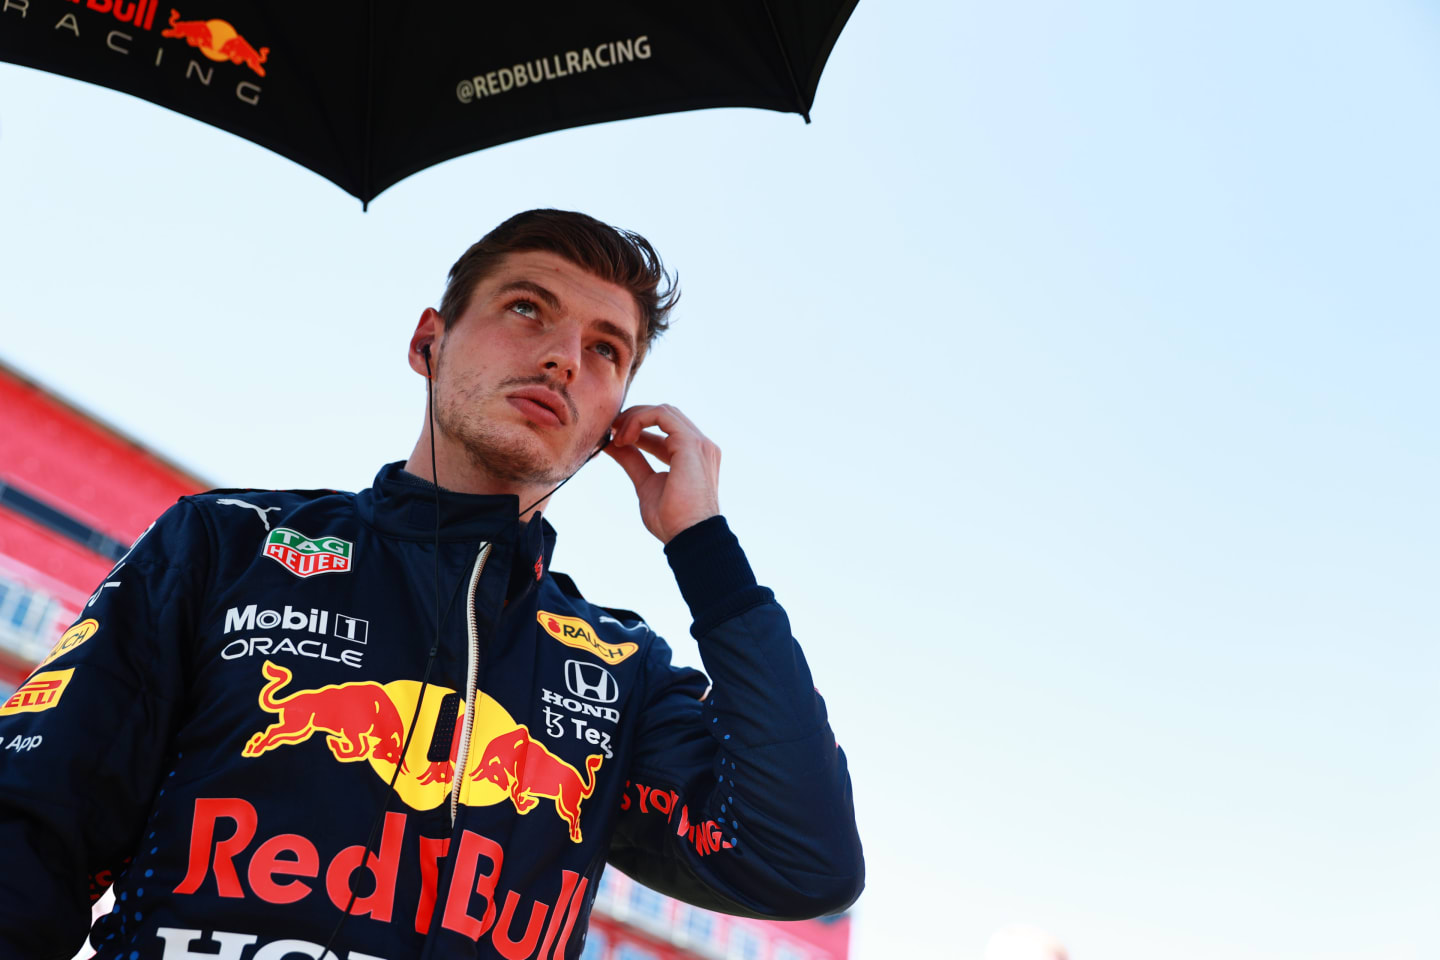 NORTHAMPTON, ENGLAND - JULY 18: Max Verstappen of Netherlands and Red Bull Racing prepares to drive